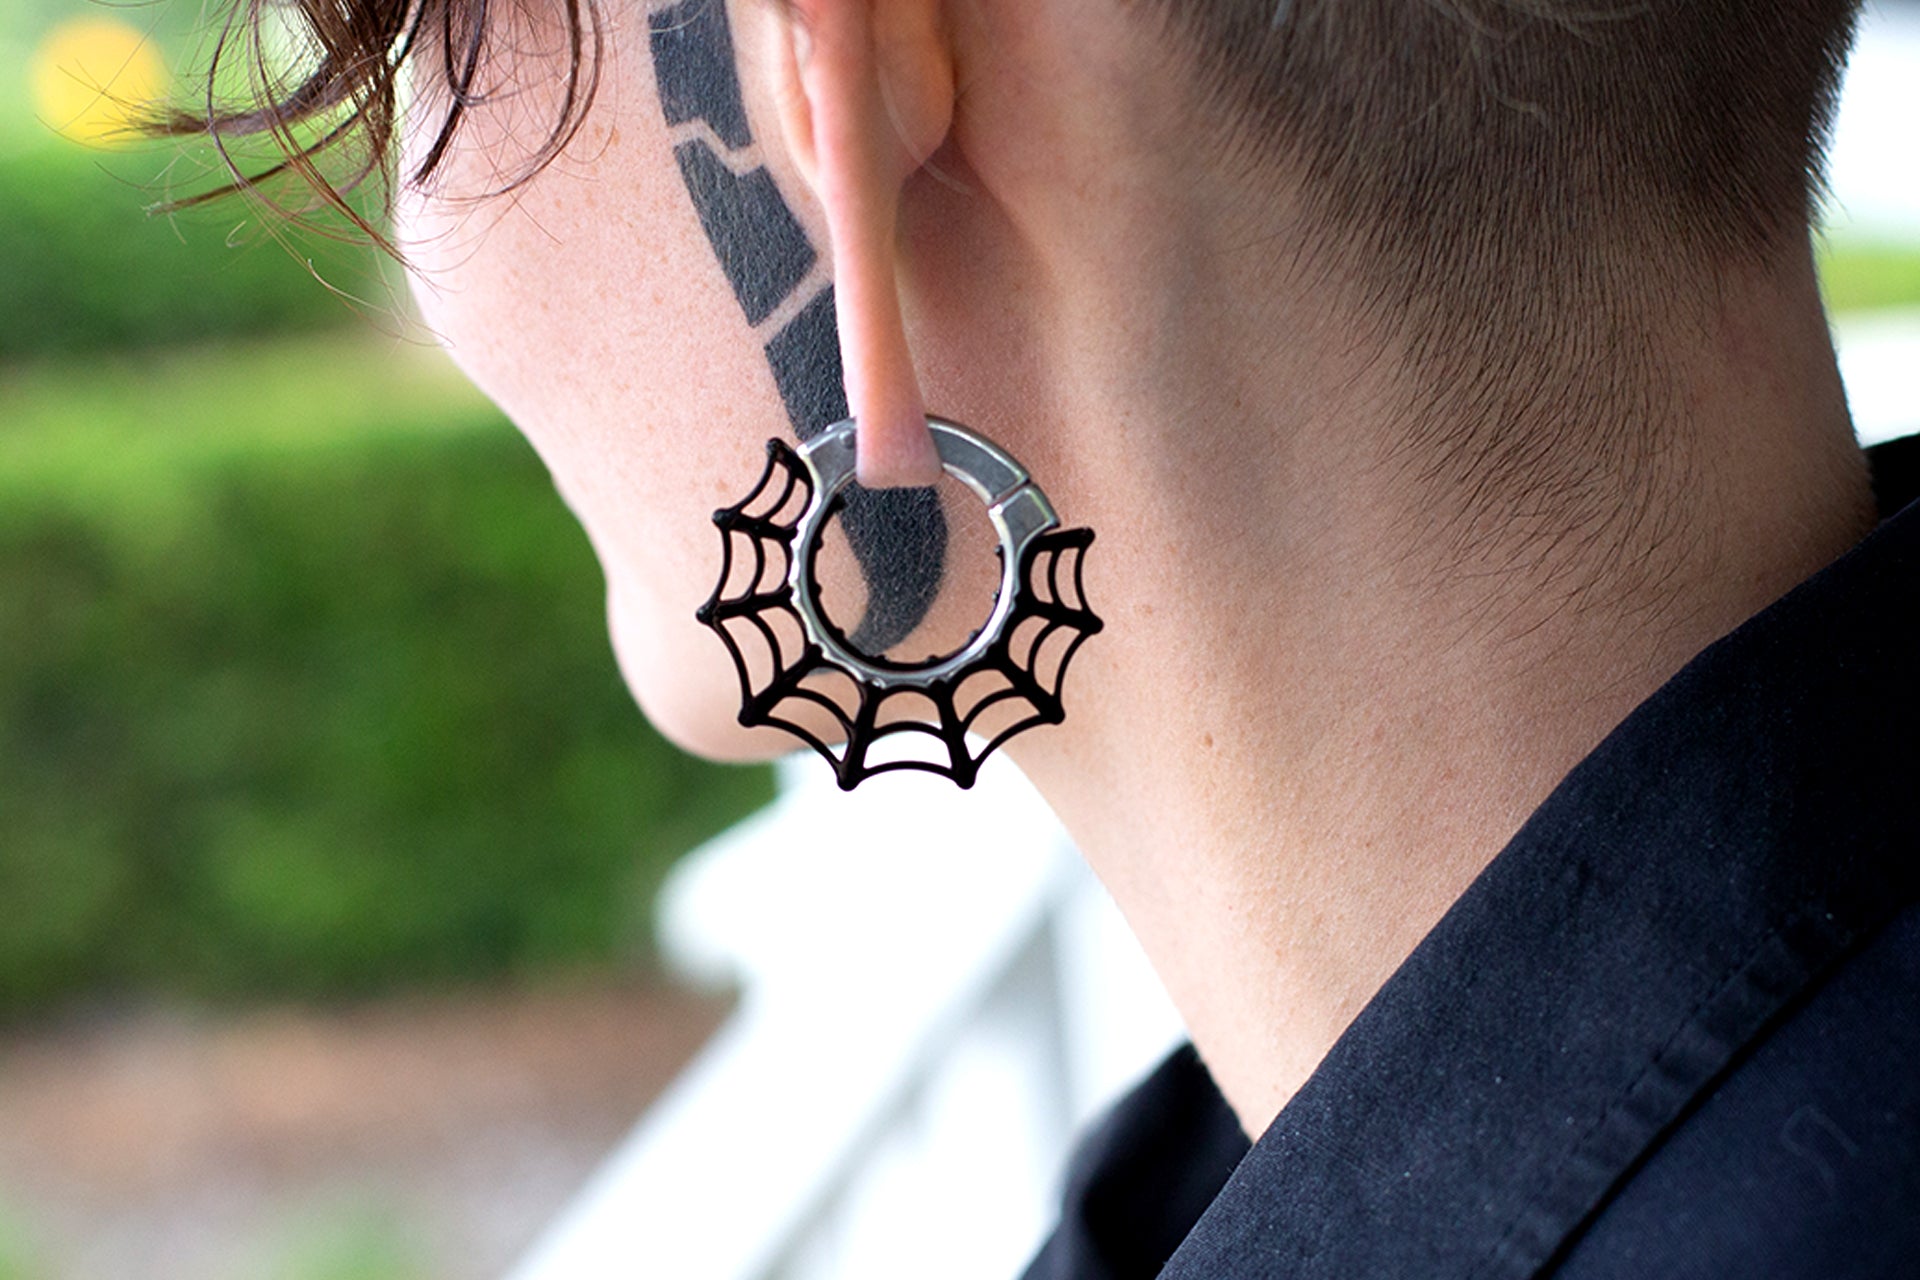 Spider Web ear weights